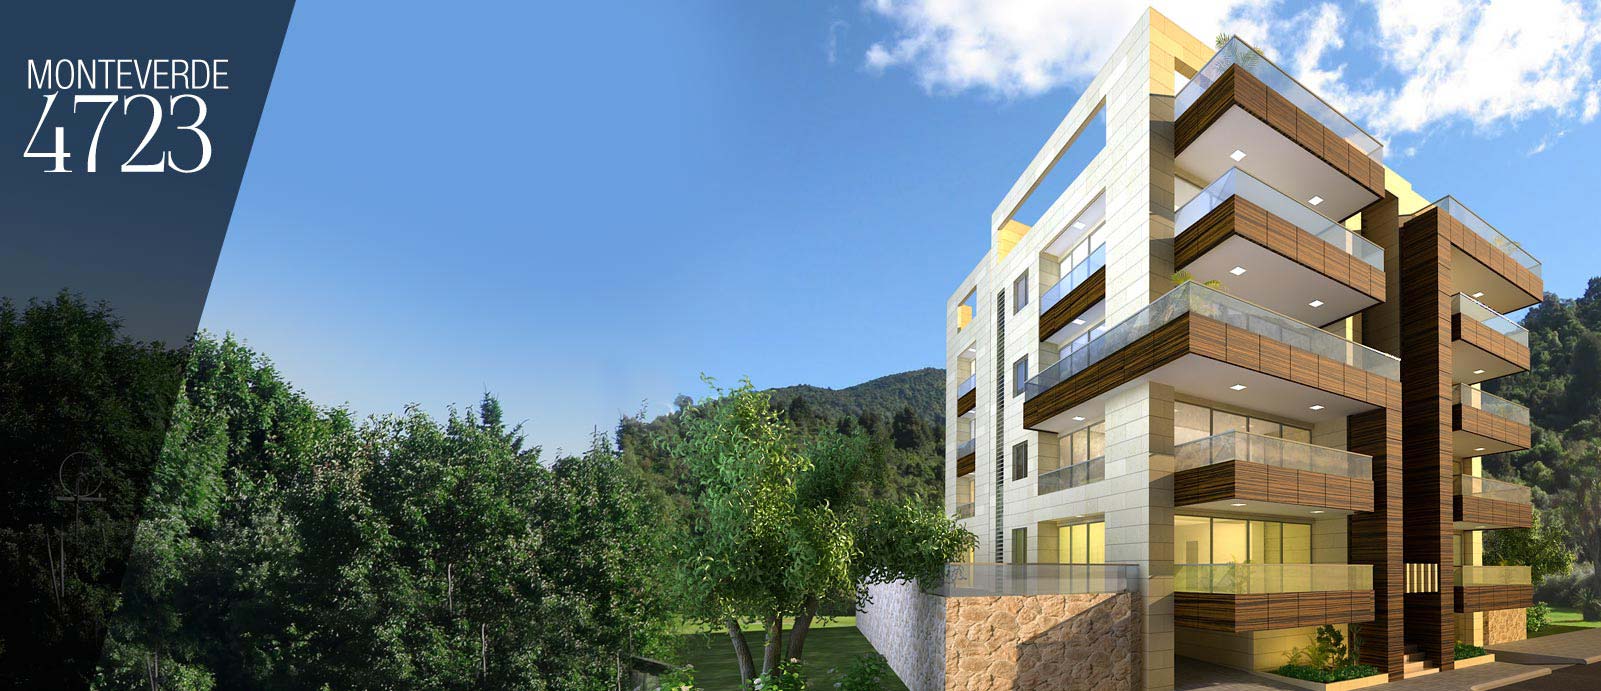 Apartments for sale in Monteverde MCP 4723